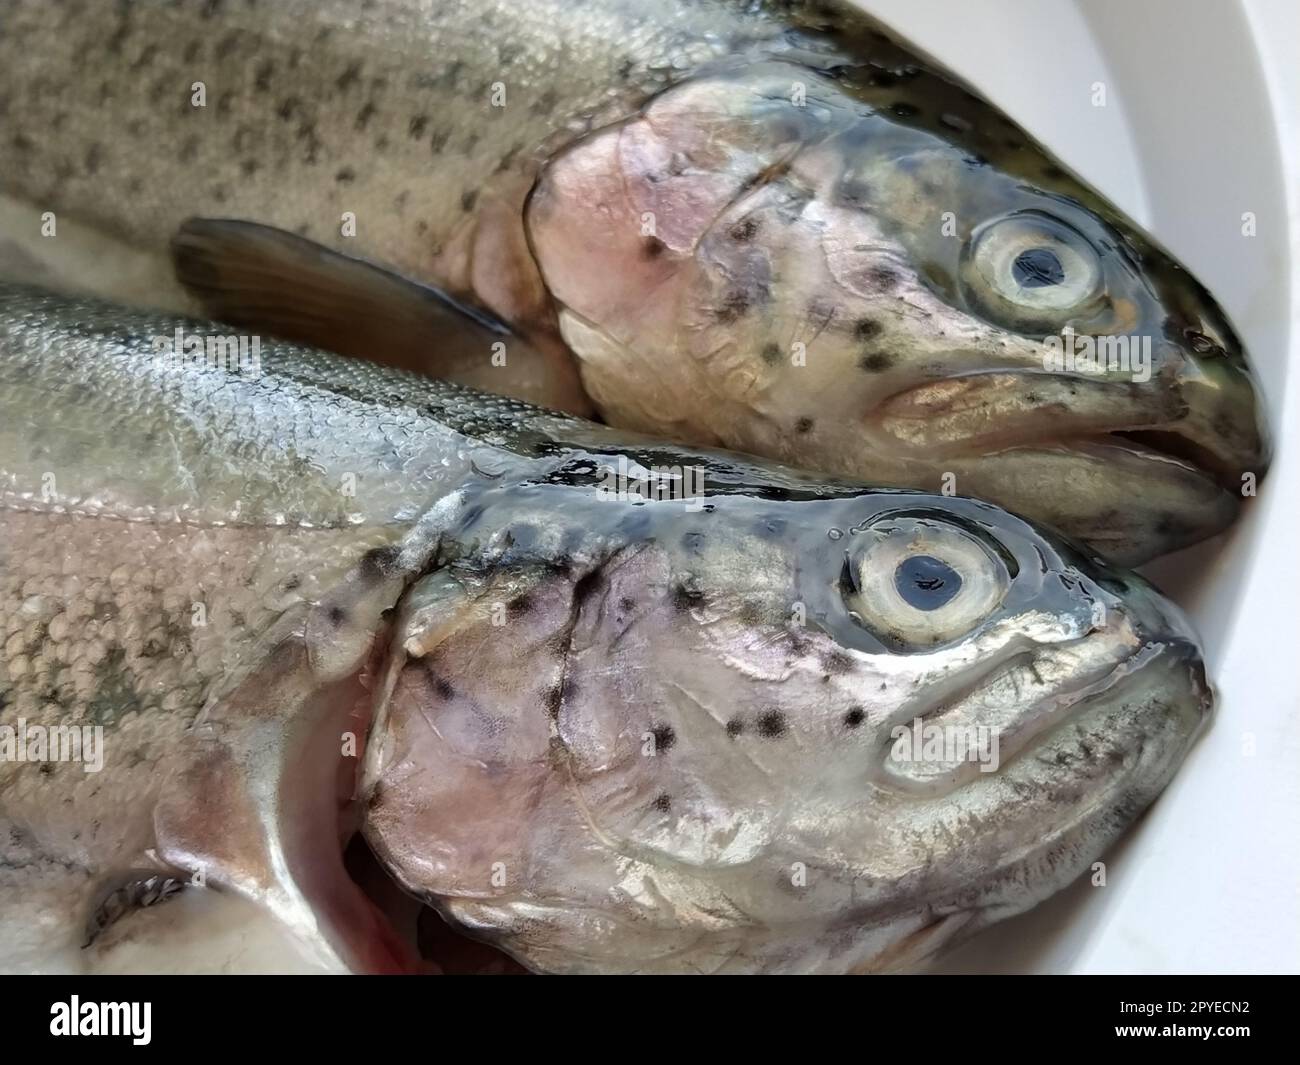 https://c8.alamy.com/comp/2PYECN2/two-trout-fish-on-a-white-plate-fresh-edible-fish-close-up-shiny-scales-on-the-body-transparent-eyes-of-the-fish-high-in-omega-3-unsaturated-fatty-acids-for-a-healthy-diet-mediterranean-diet-2PYECN2.jpg